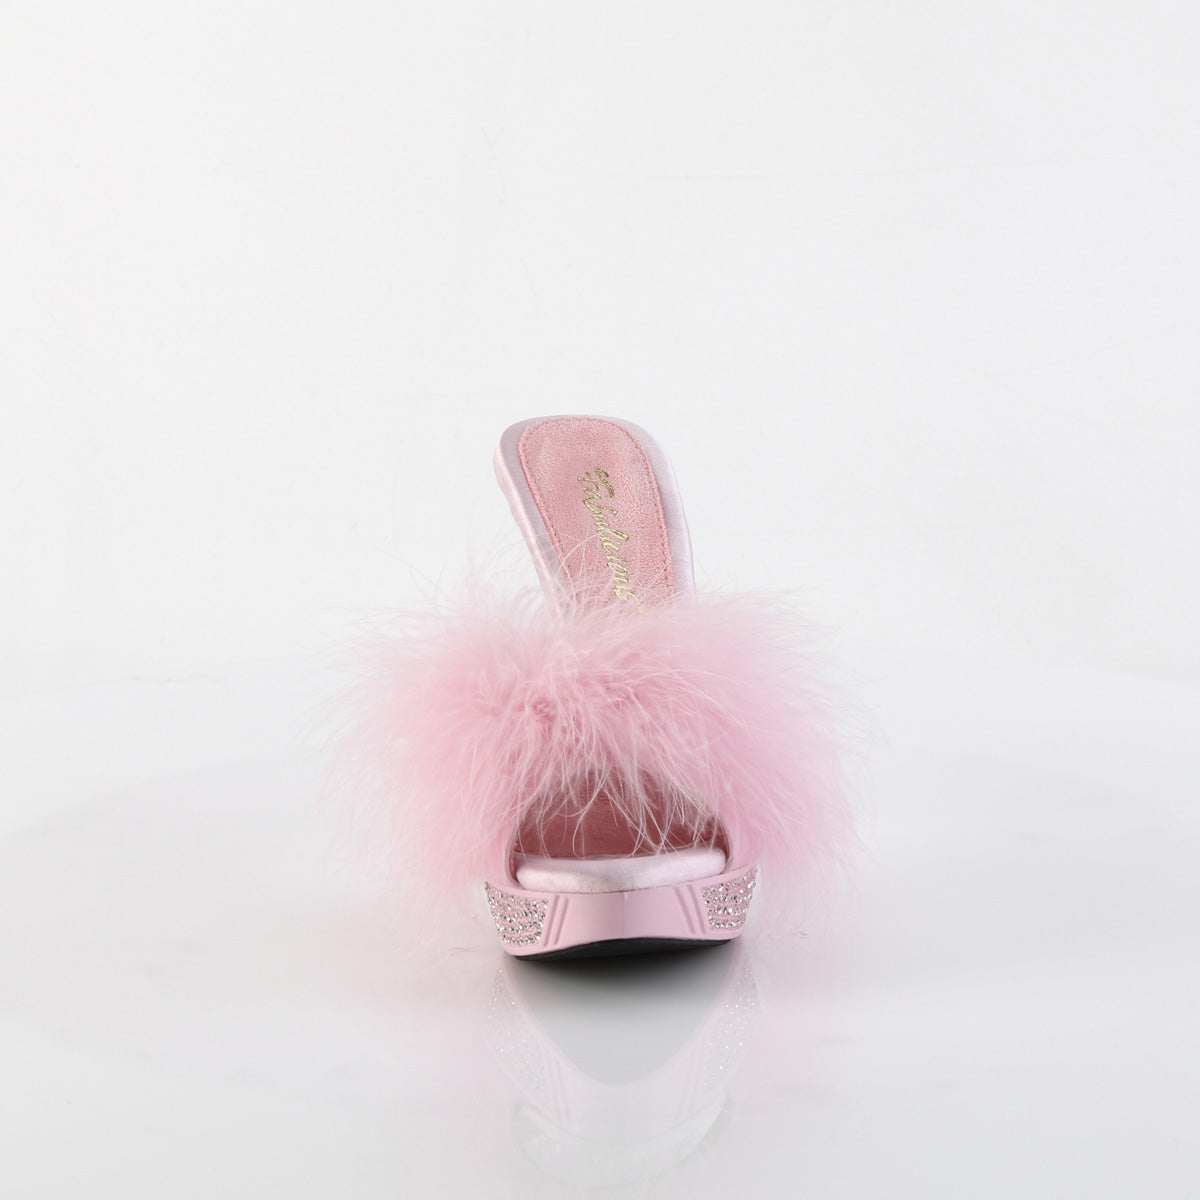 ELEGANT-401F Fabulicious B Pink Marabou-Faux Leather/B Pink Shoes [Sexy Shoes]